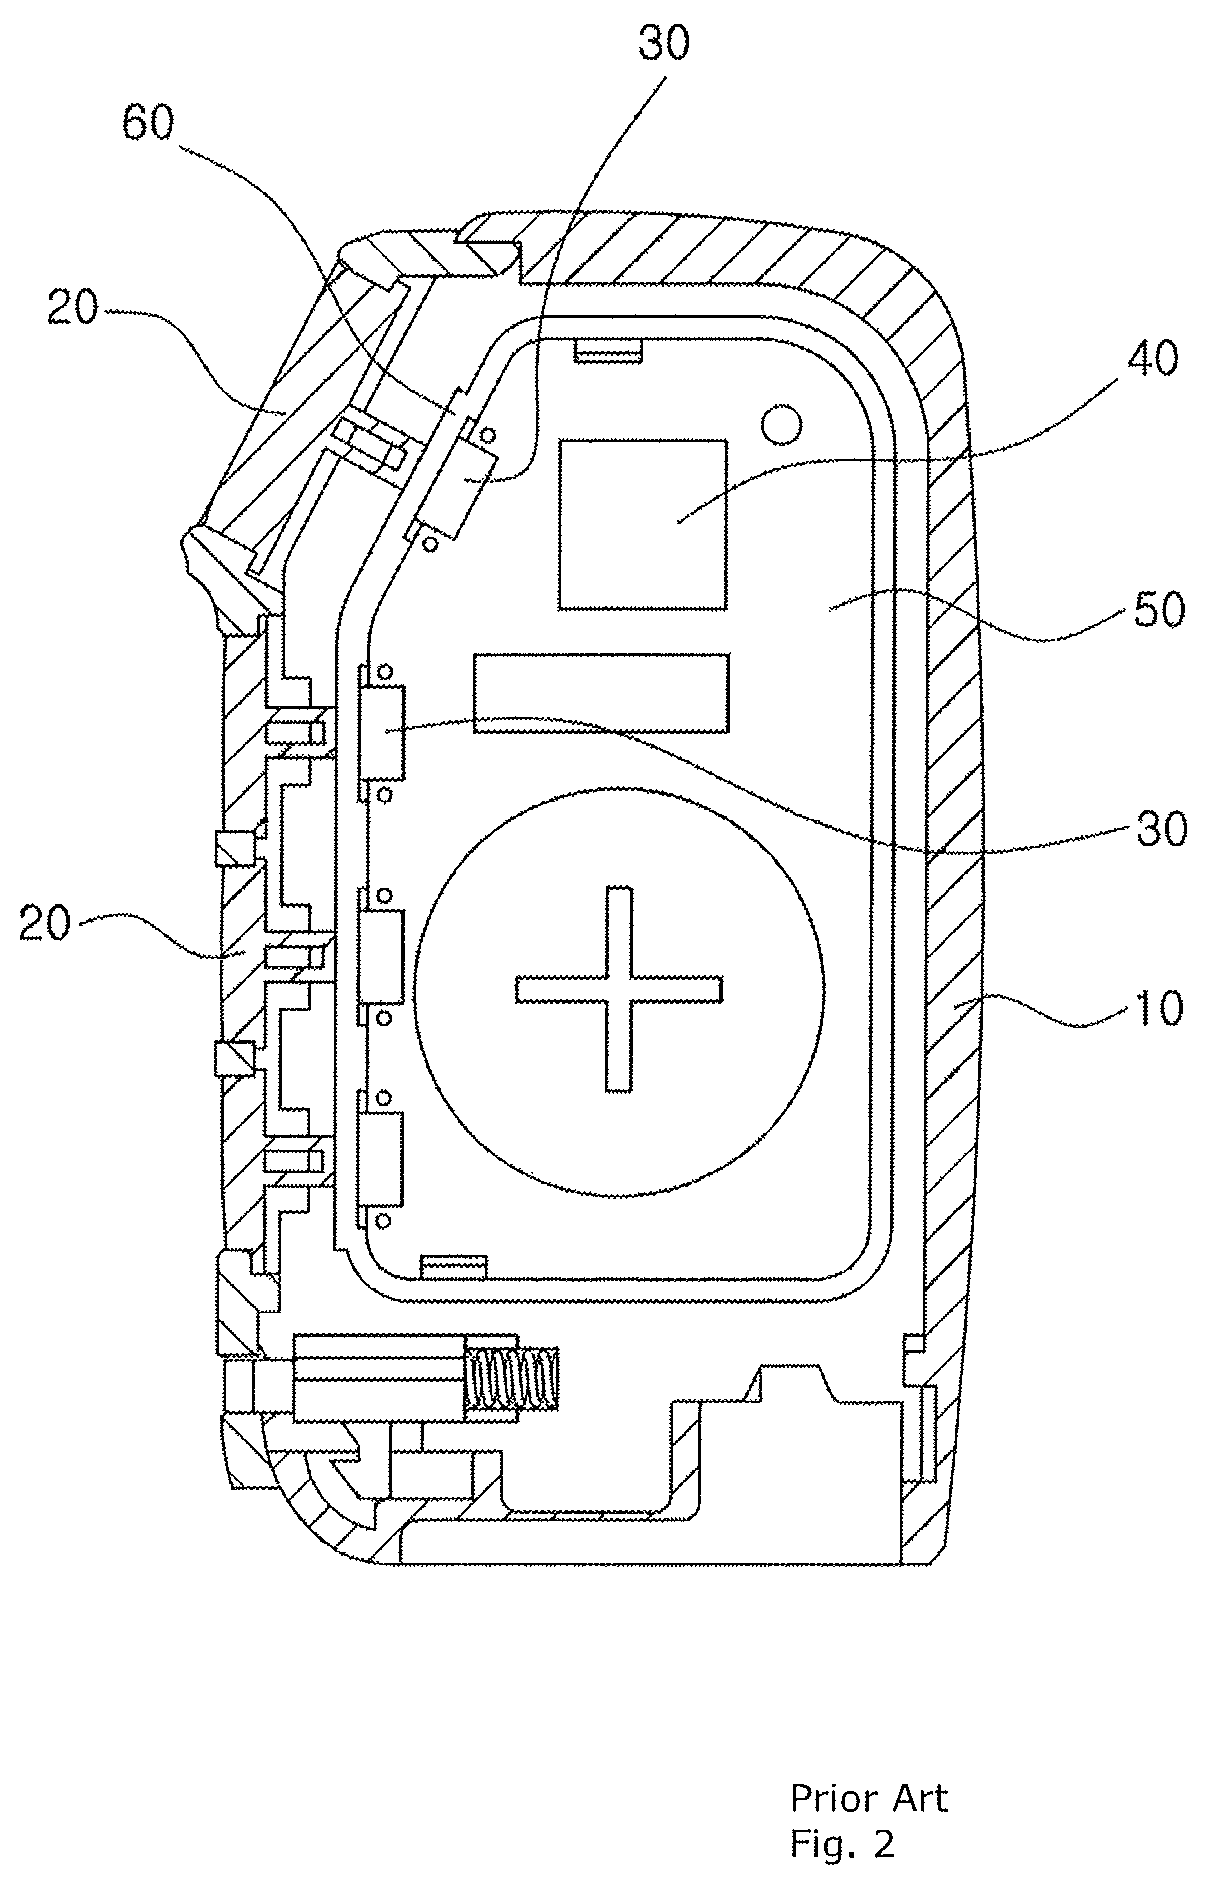 Structure of a fob key for increasing the operating force of a button